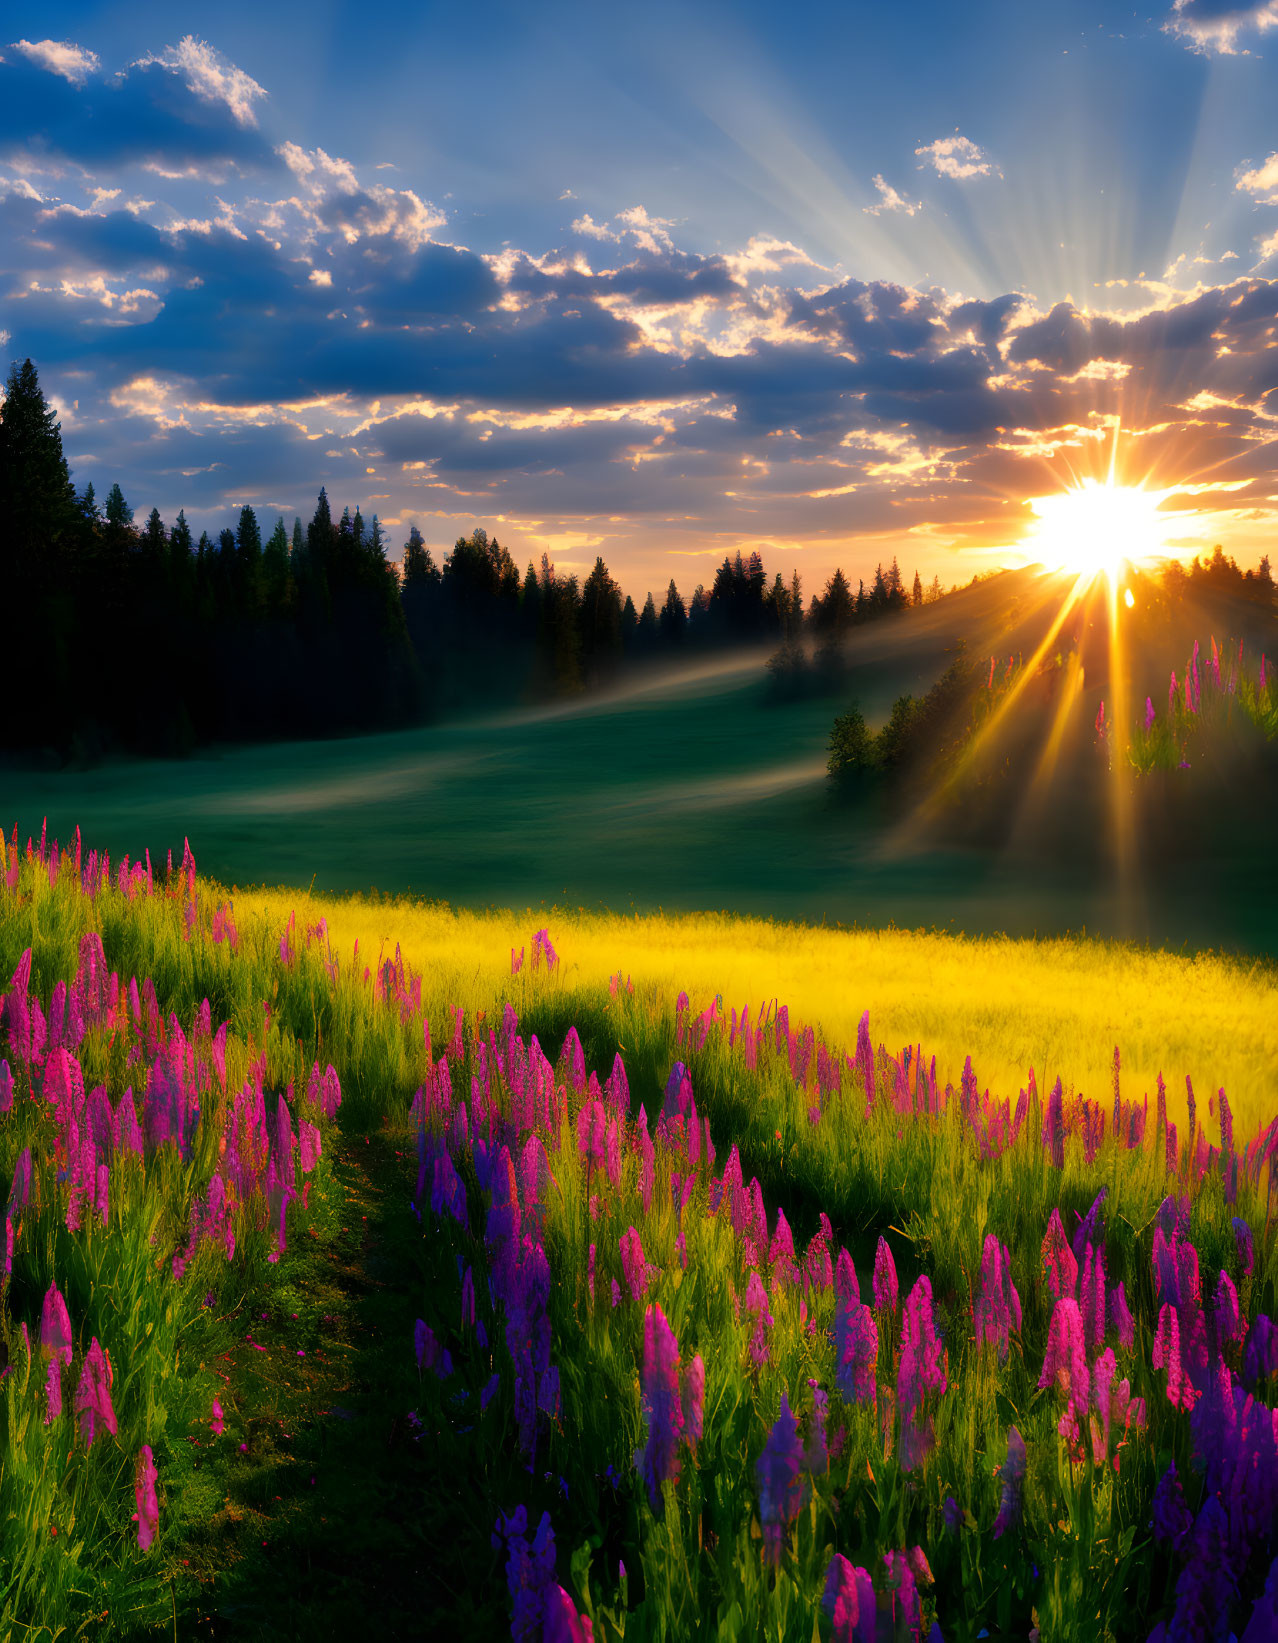 Vibrant sunrise over lush meadow with purple flowers